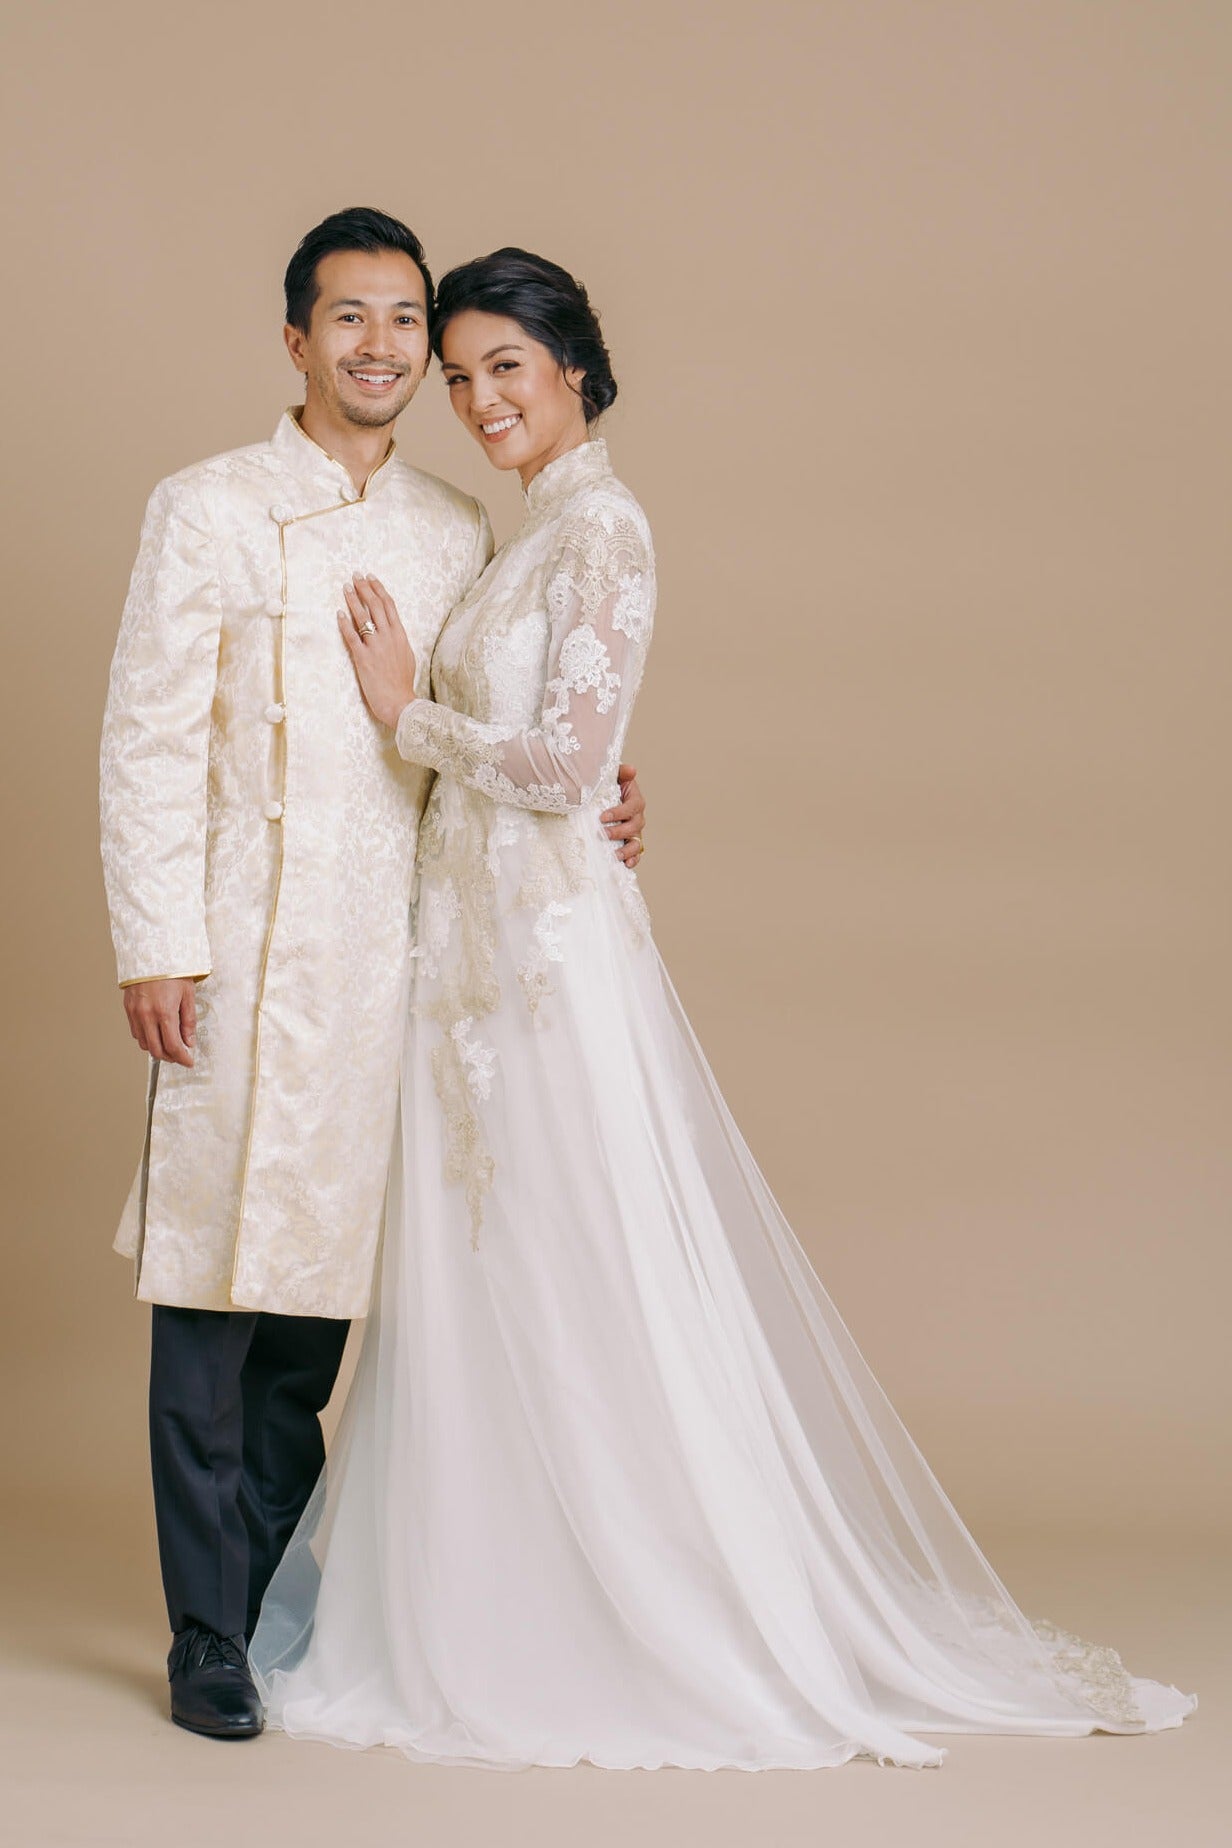 What to Wear When Invited to a Traditional Vietnamese Wedding